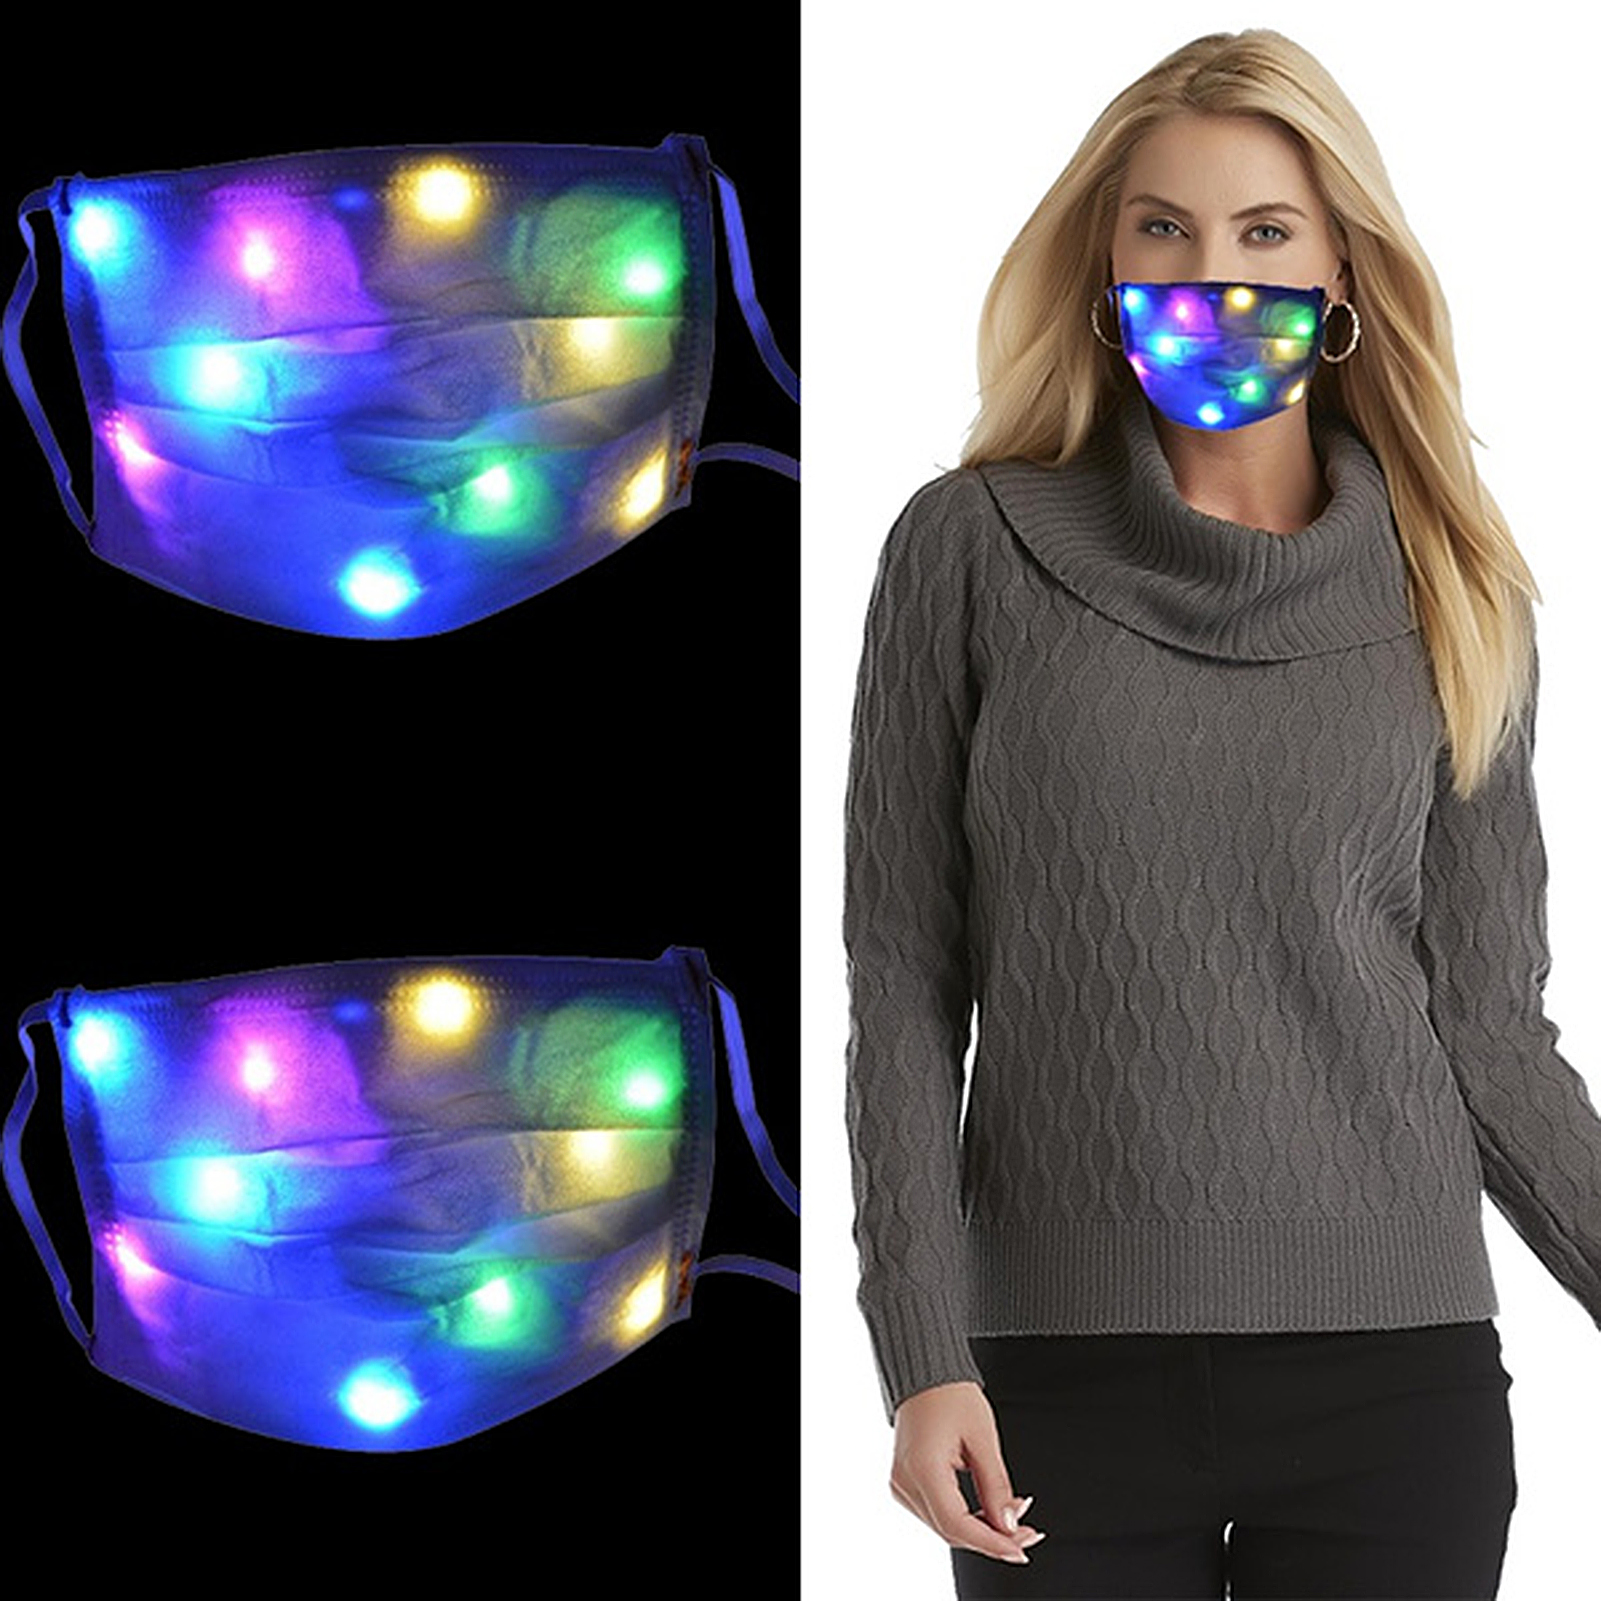 10 LED Colorful Lights Flashing Unisex Bar Party Christmas Halloween Face Cover